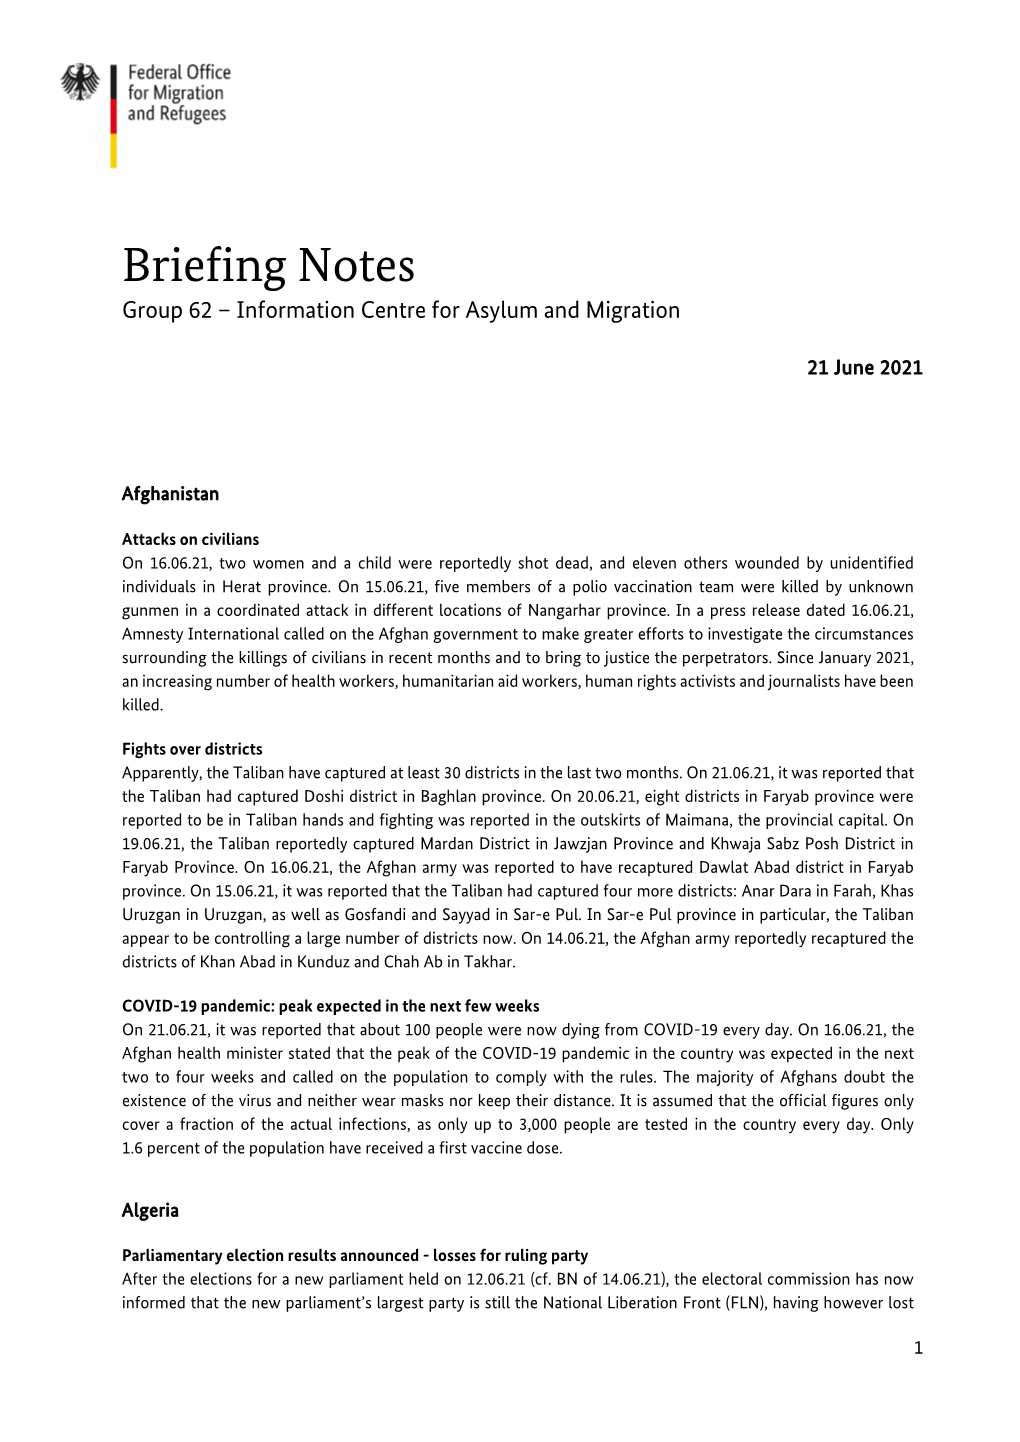 Briefing Notes Group 62 – Information Centre for Asylum and Migration